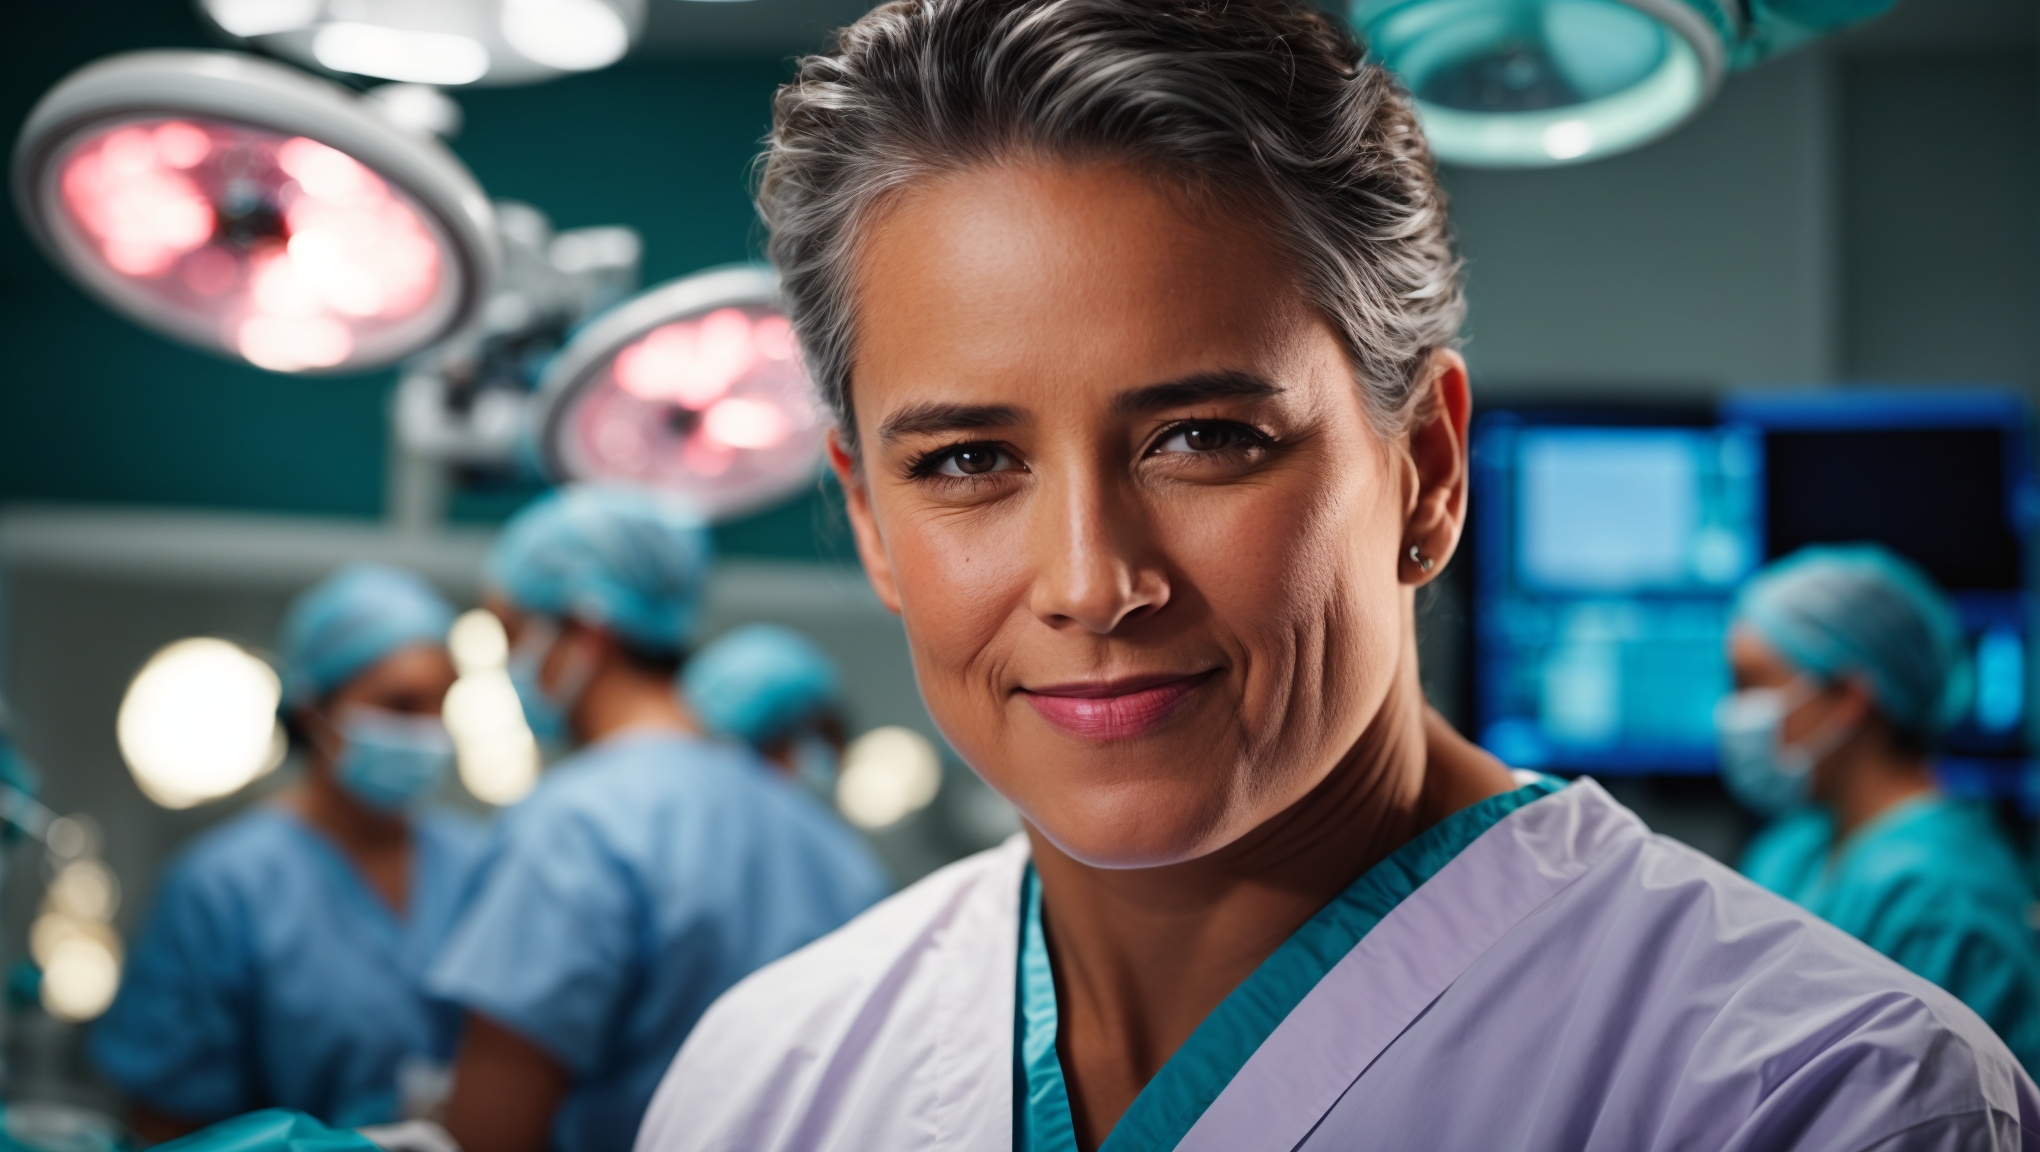 An experienced Plastic Surgeon in the Operating Room Surrounded by Staff